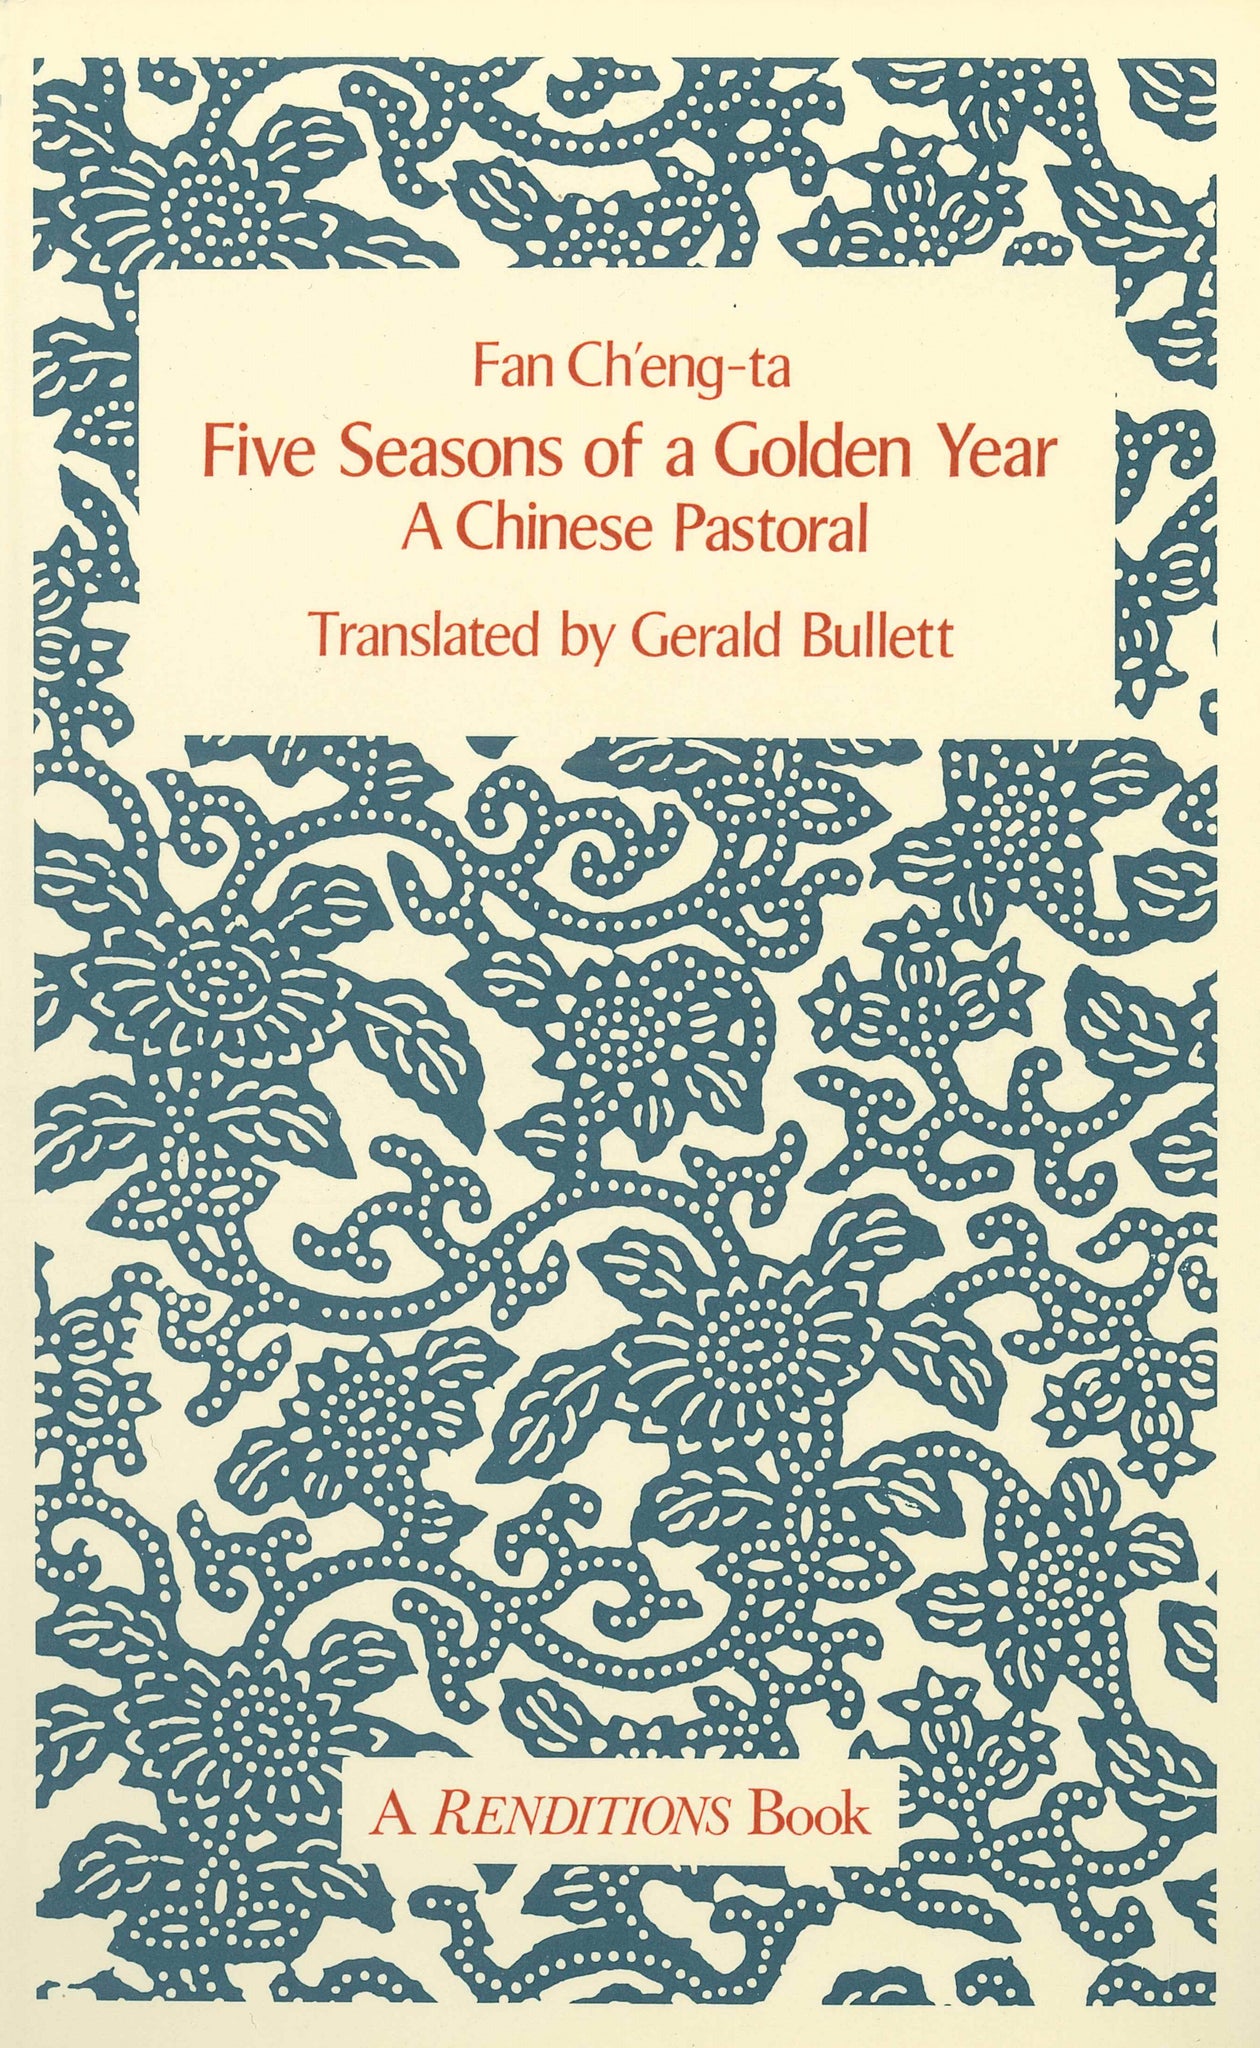 Five Seasons of a Golden Year: A Chinese Pastoral